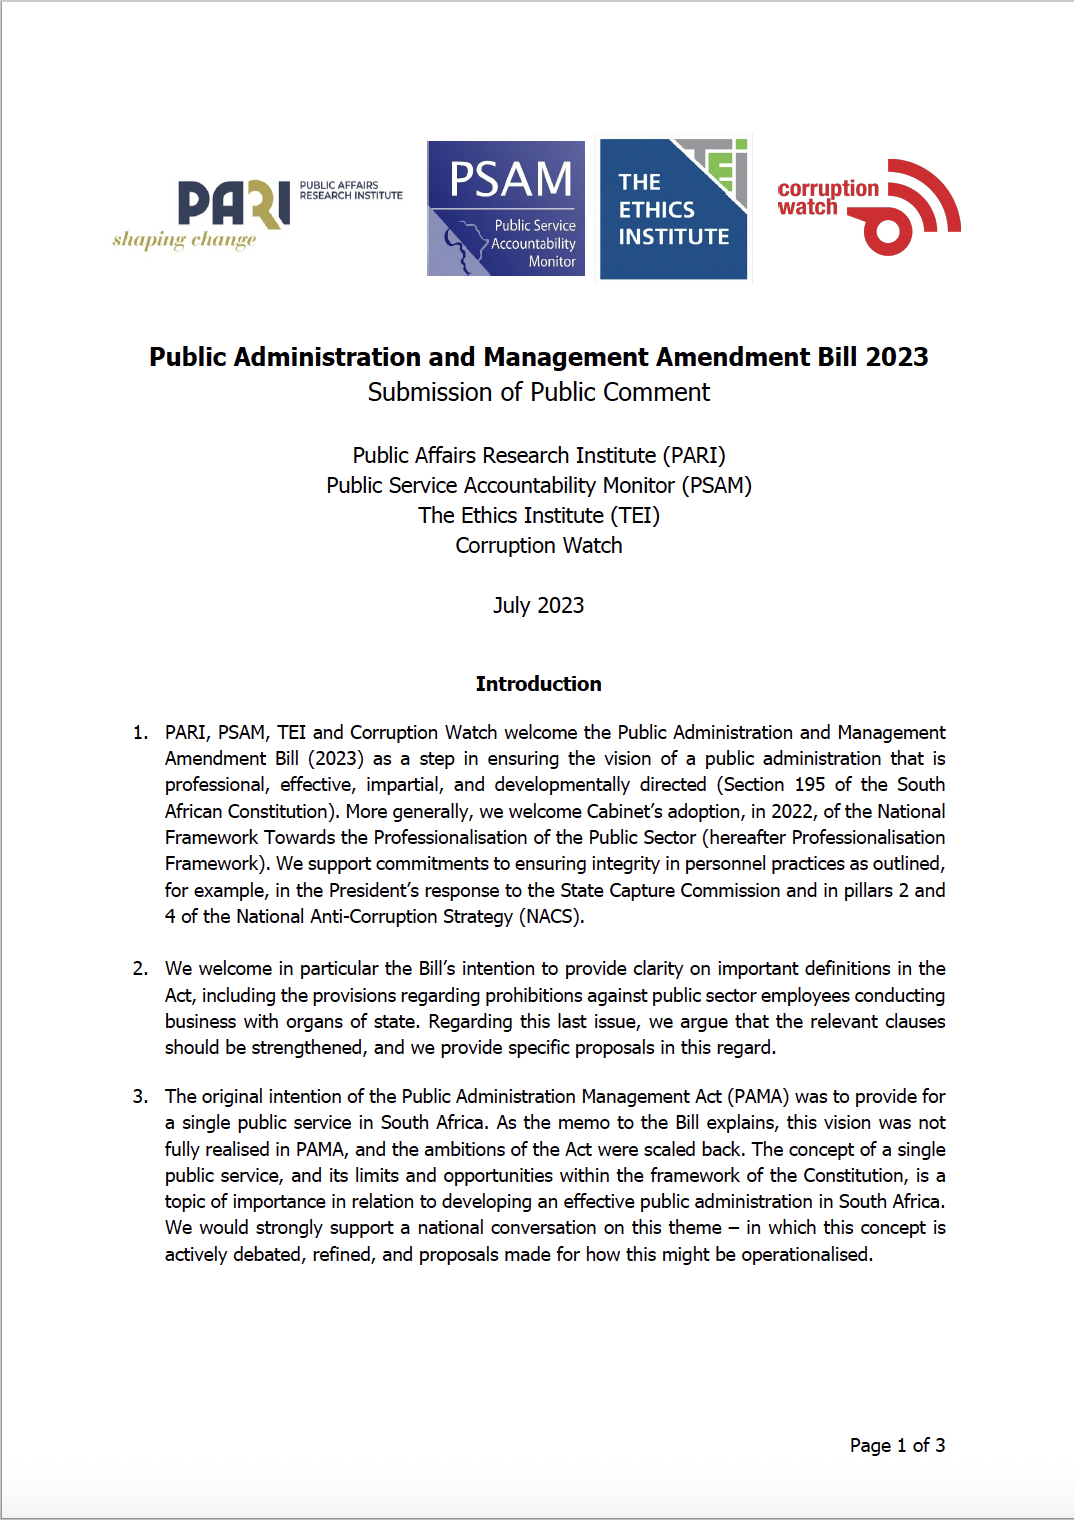 Public submission to Parliament on the Public Administration and Management Bill 2023